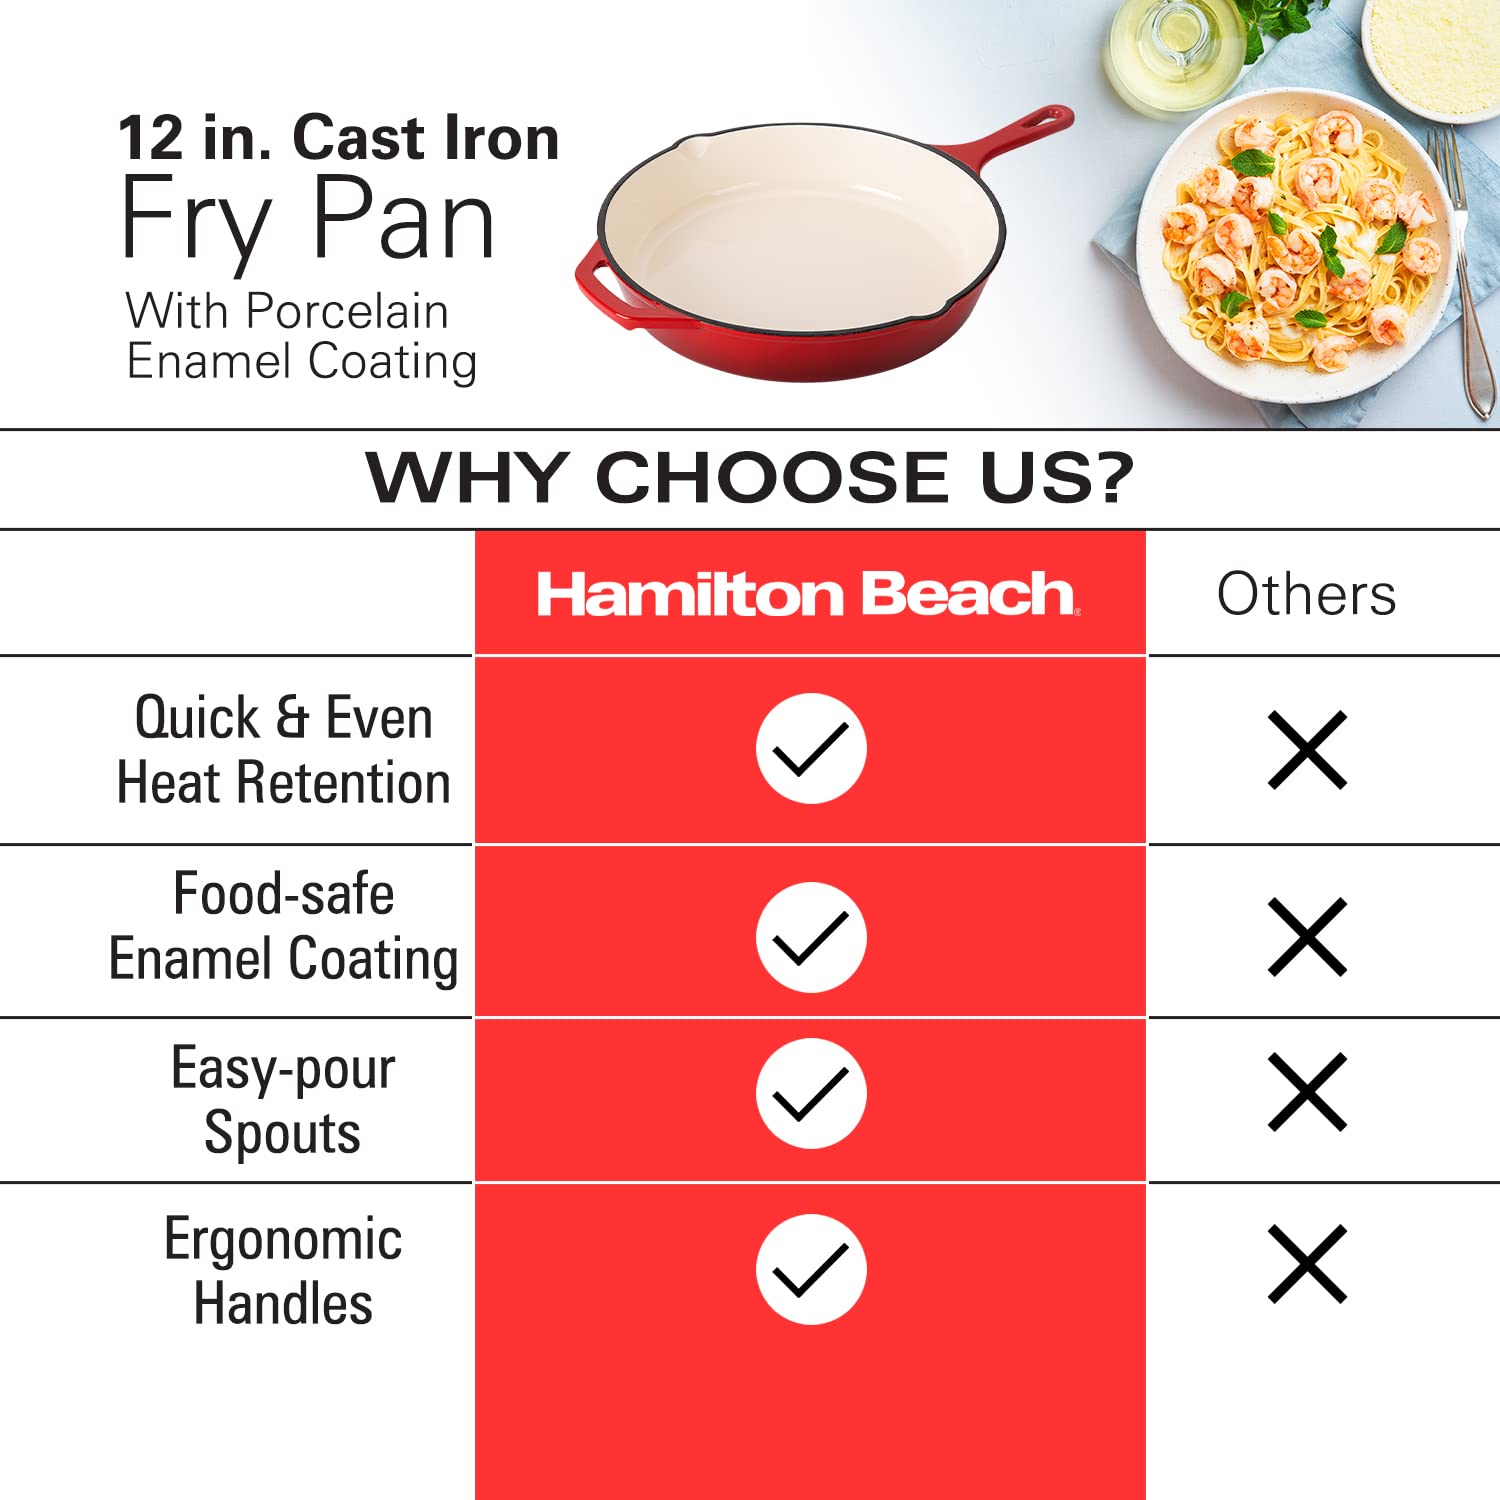 Hamilton Beach Enameled Cast Iron Fry Pan 12-Inch Red, Cream Enamel coating, Skillet Pan For Stove top and Oven, Even Heat Distribution, Safe Up to 400 Degrees, Durable